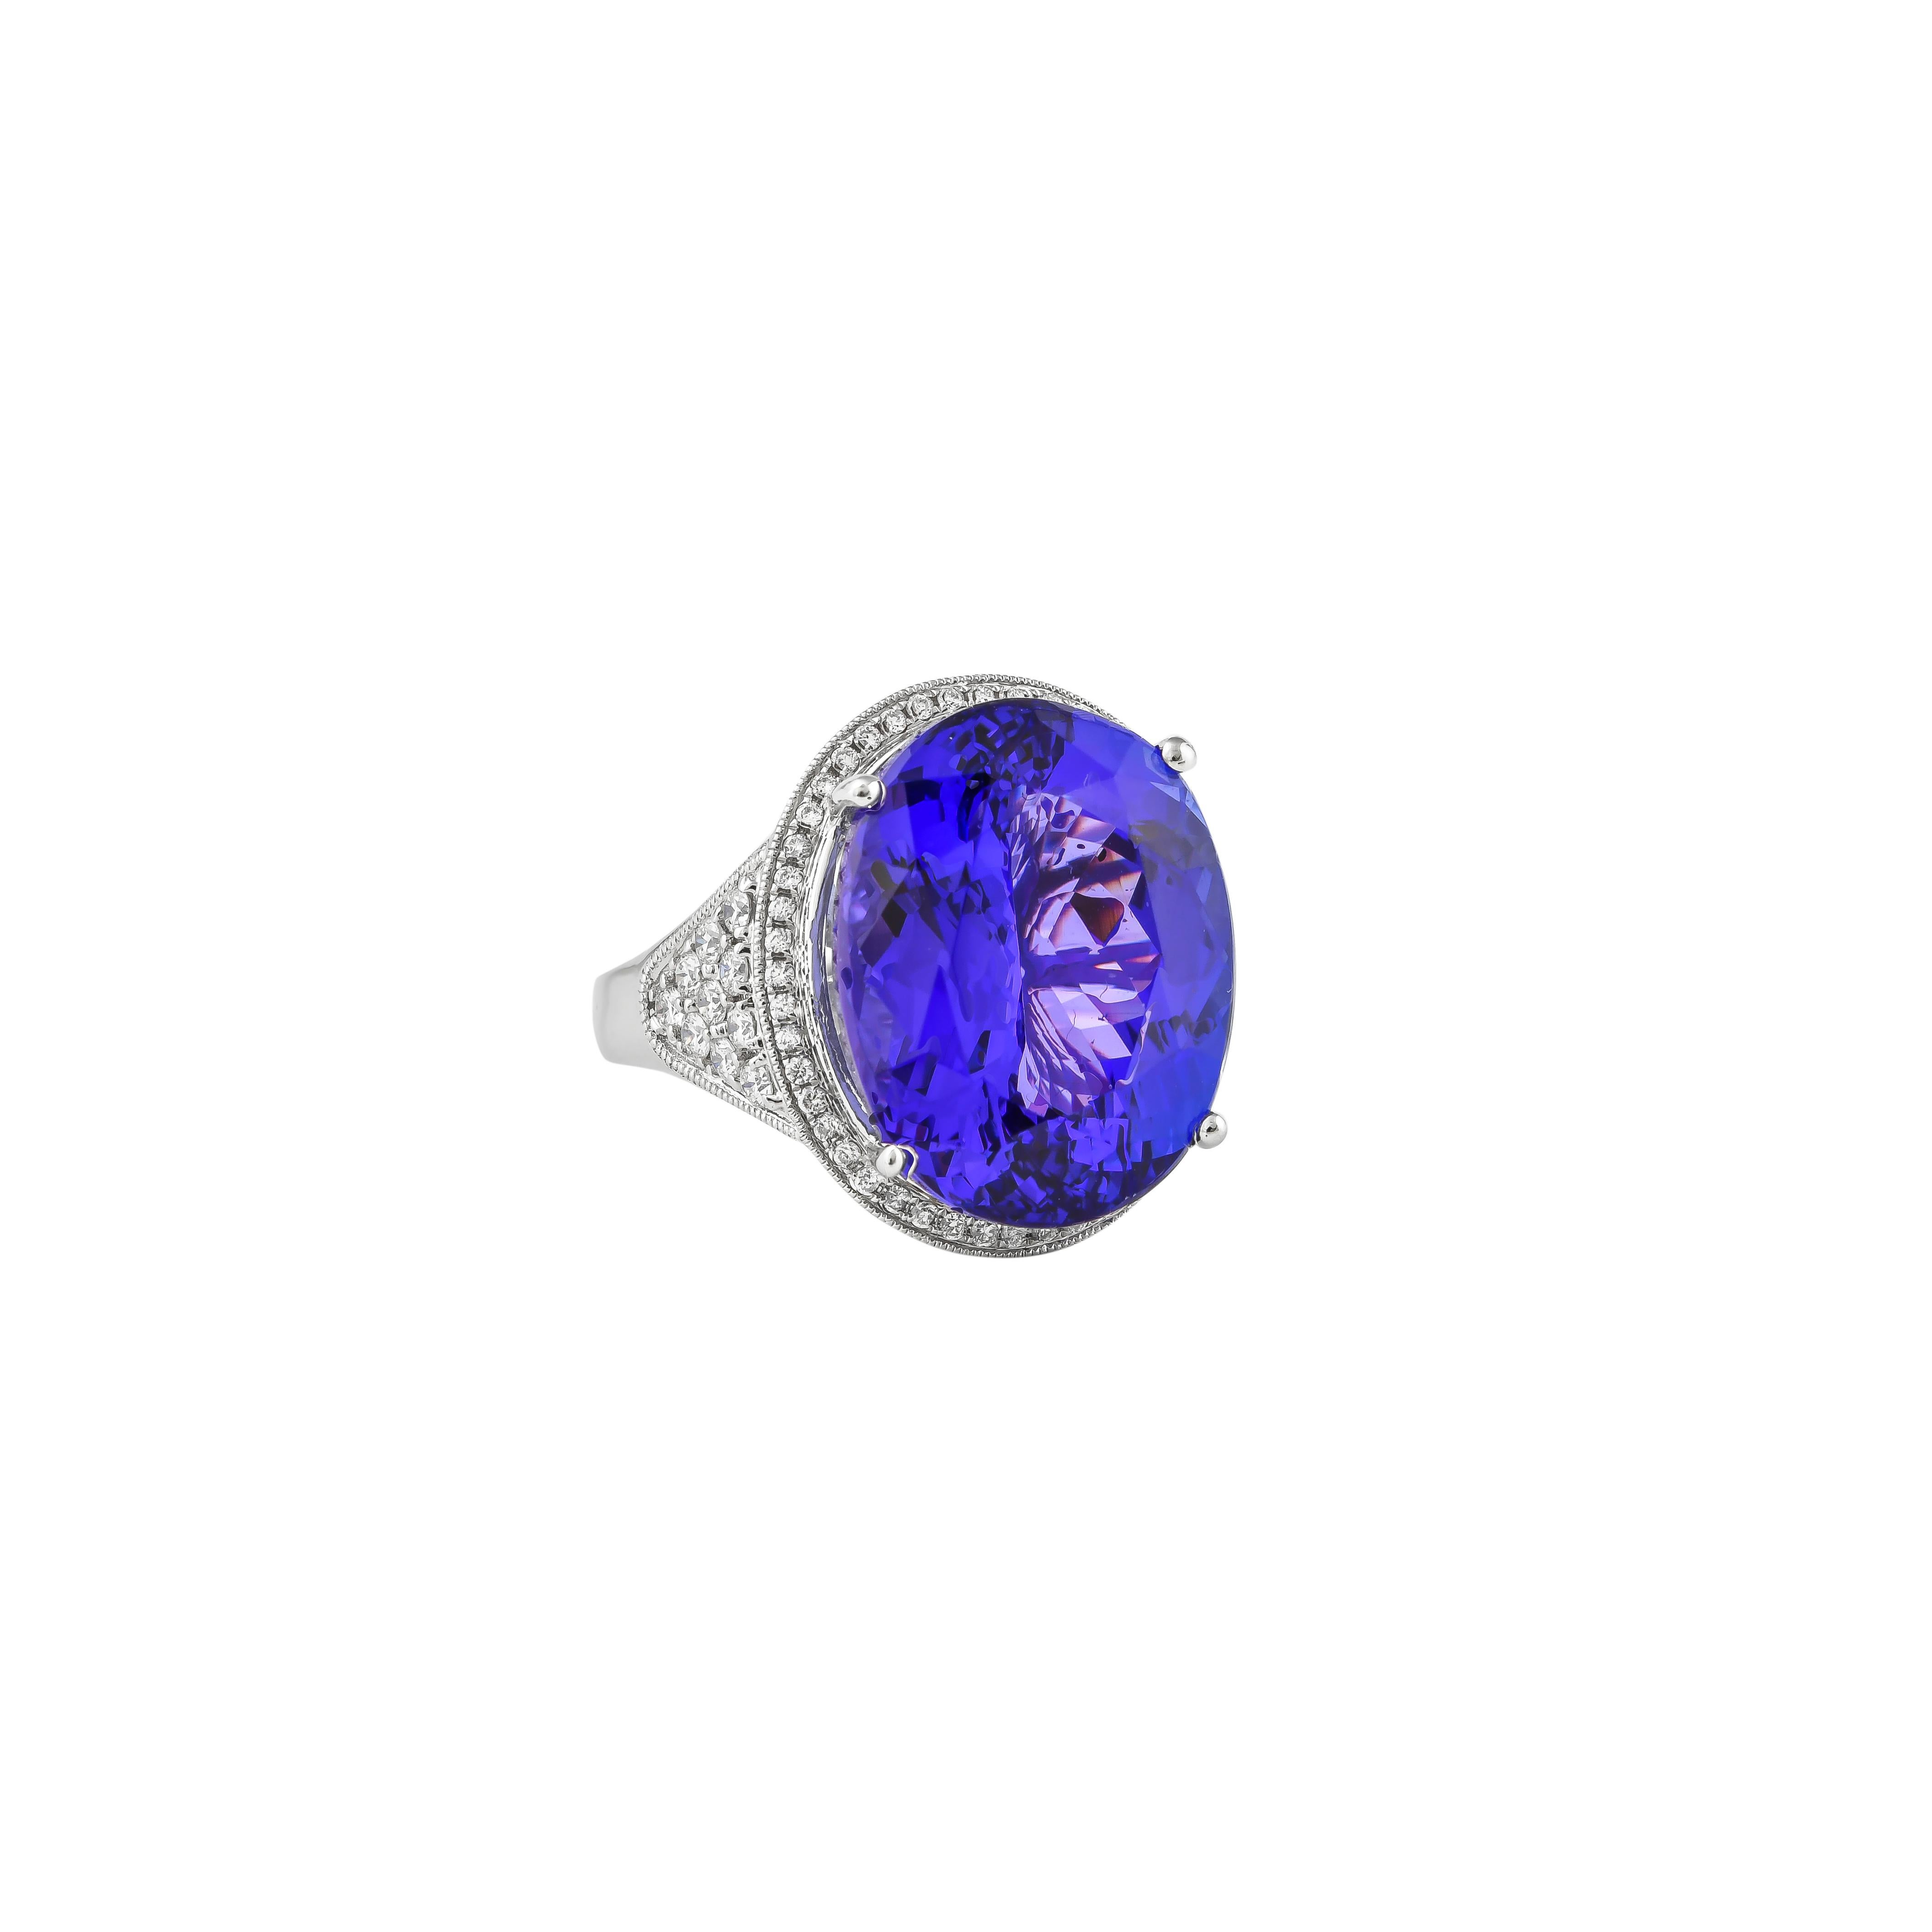 This collection features a selection of the most tantalizing Tanzanites. This enchanting East African gemstone can only be procured from one mine in the foothills of Mount Kilimanjaro, Tanzania. We have accented the rich purple-blue hues of the